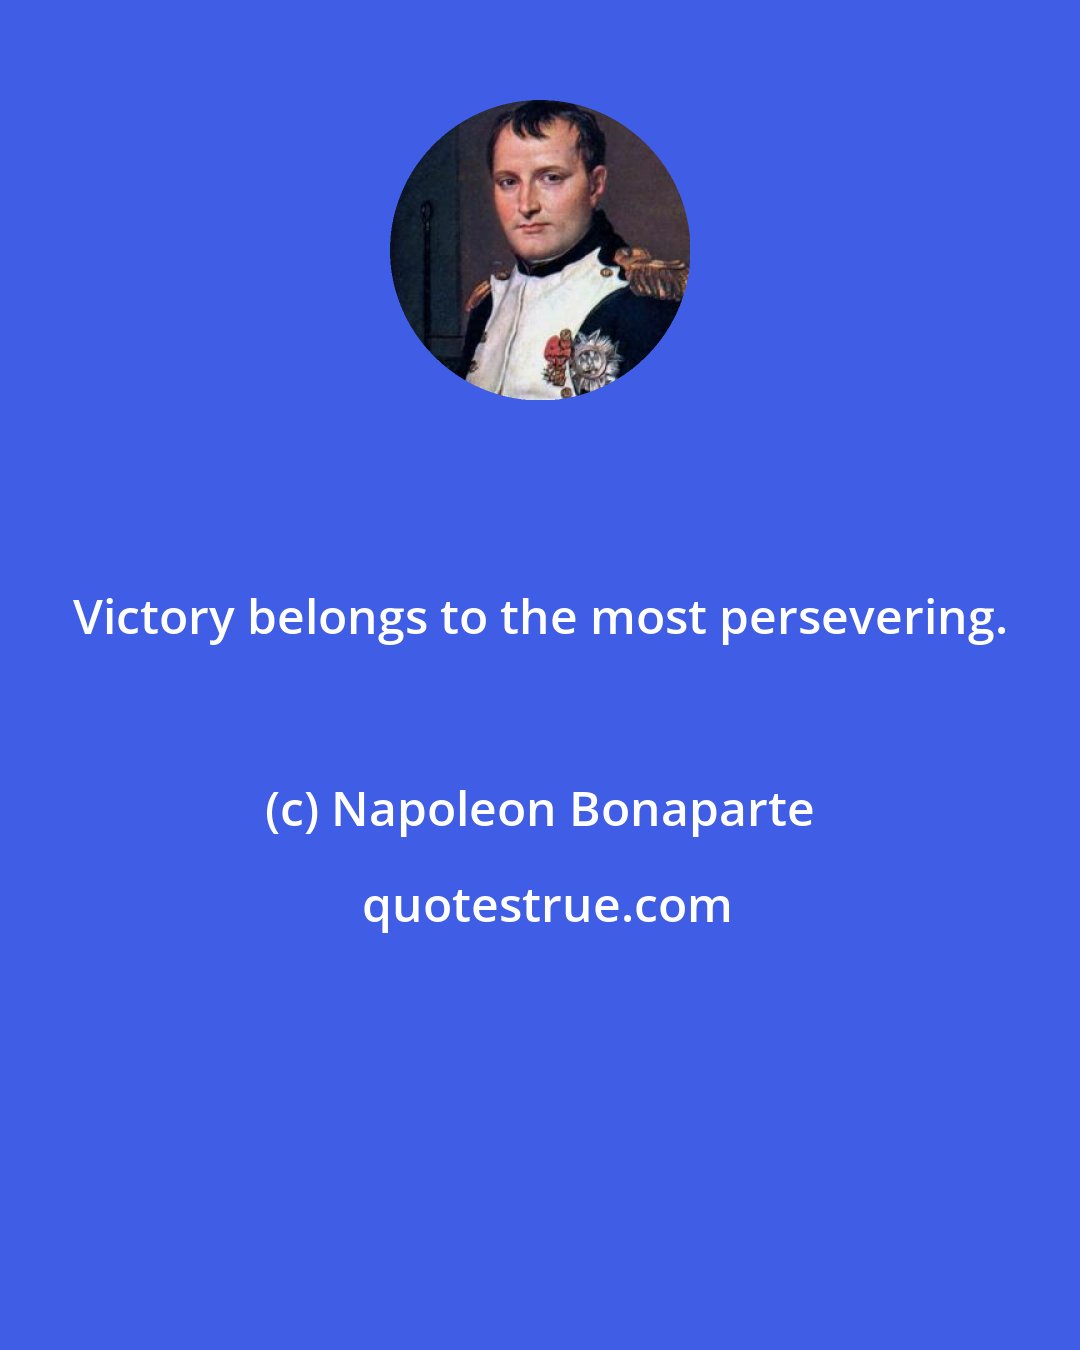 Napoleon Bonaparte: Victory belongs to the most persevering.